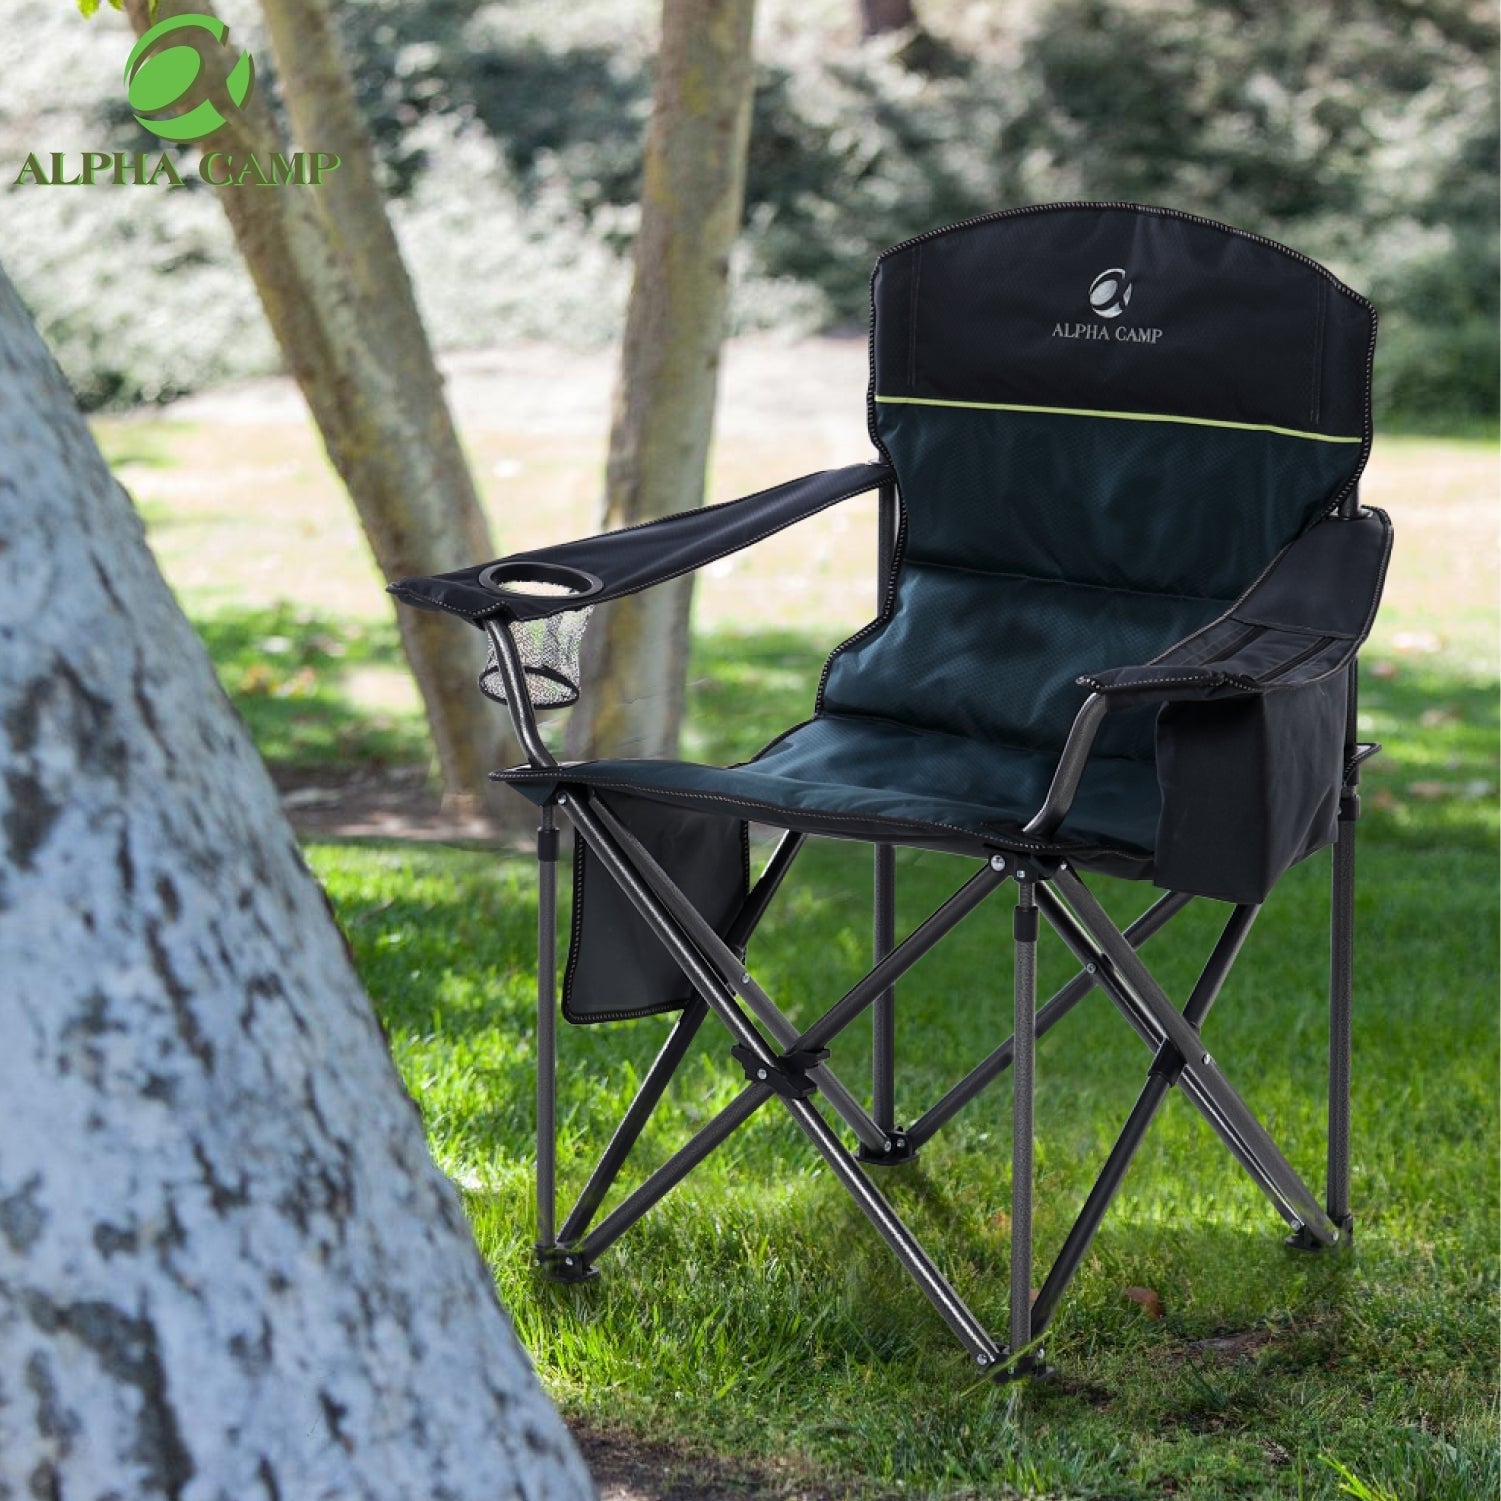 Alpha Camp Oversized Folding Chair Heavy Duty Support 450 Lbs Steel Frame Collapsible Padded Arm Chair With Cup Holder